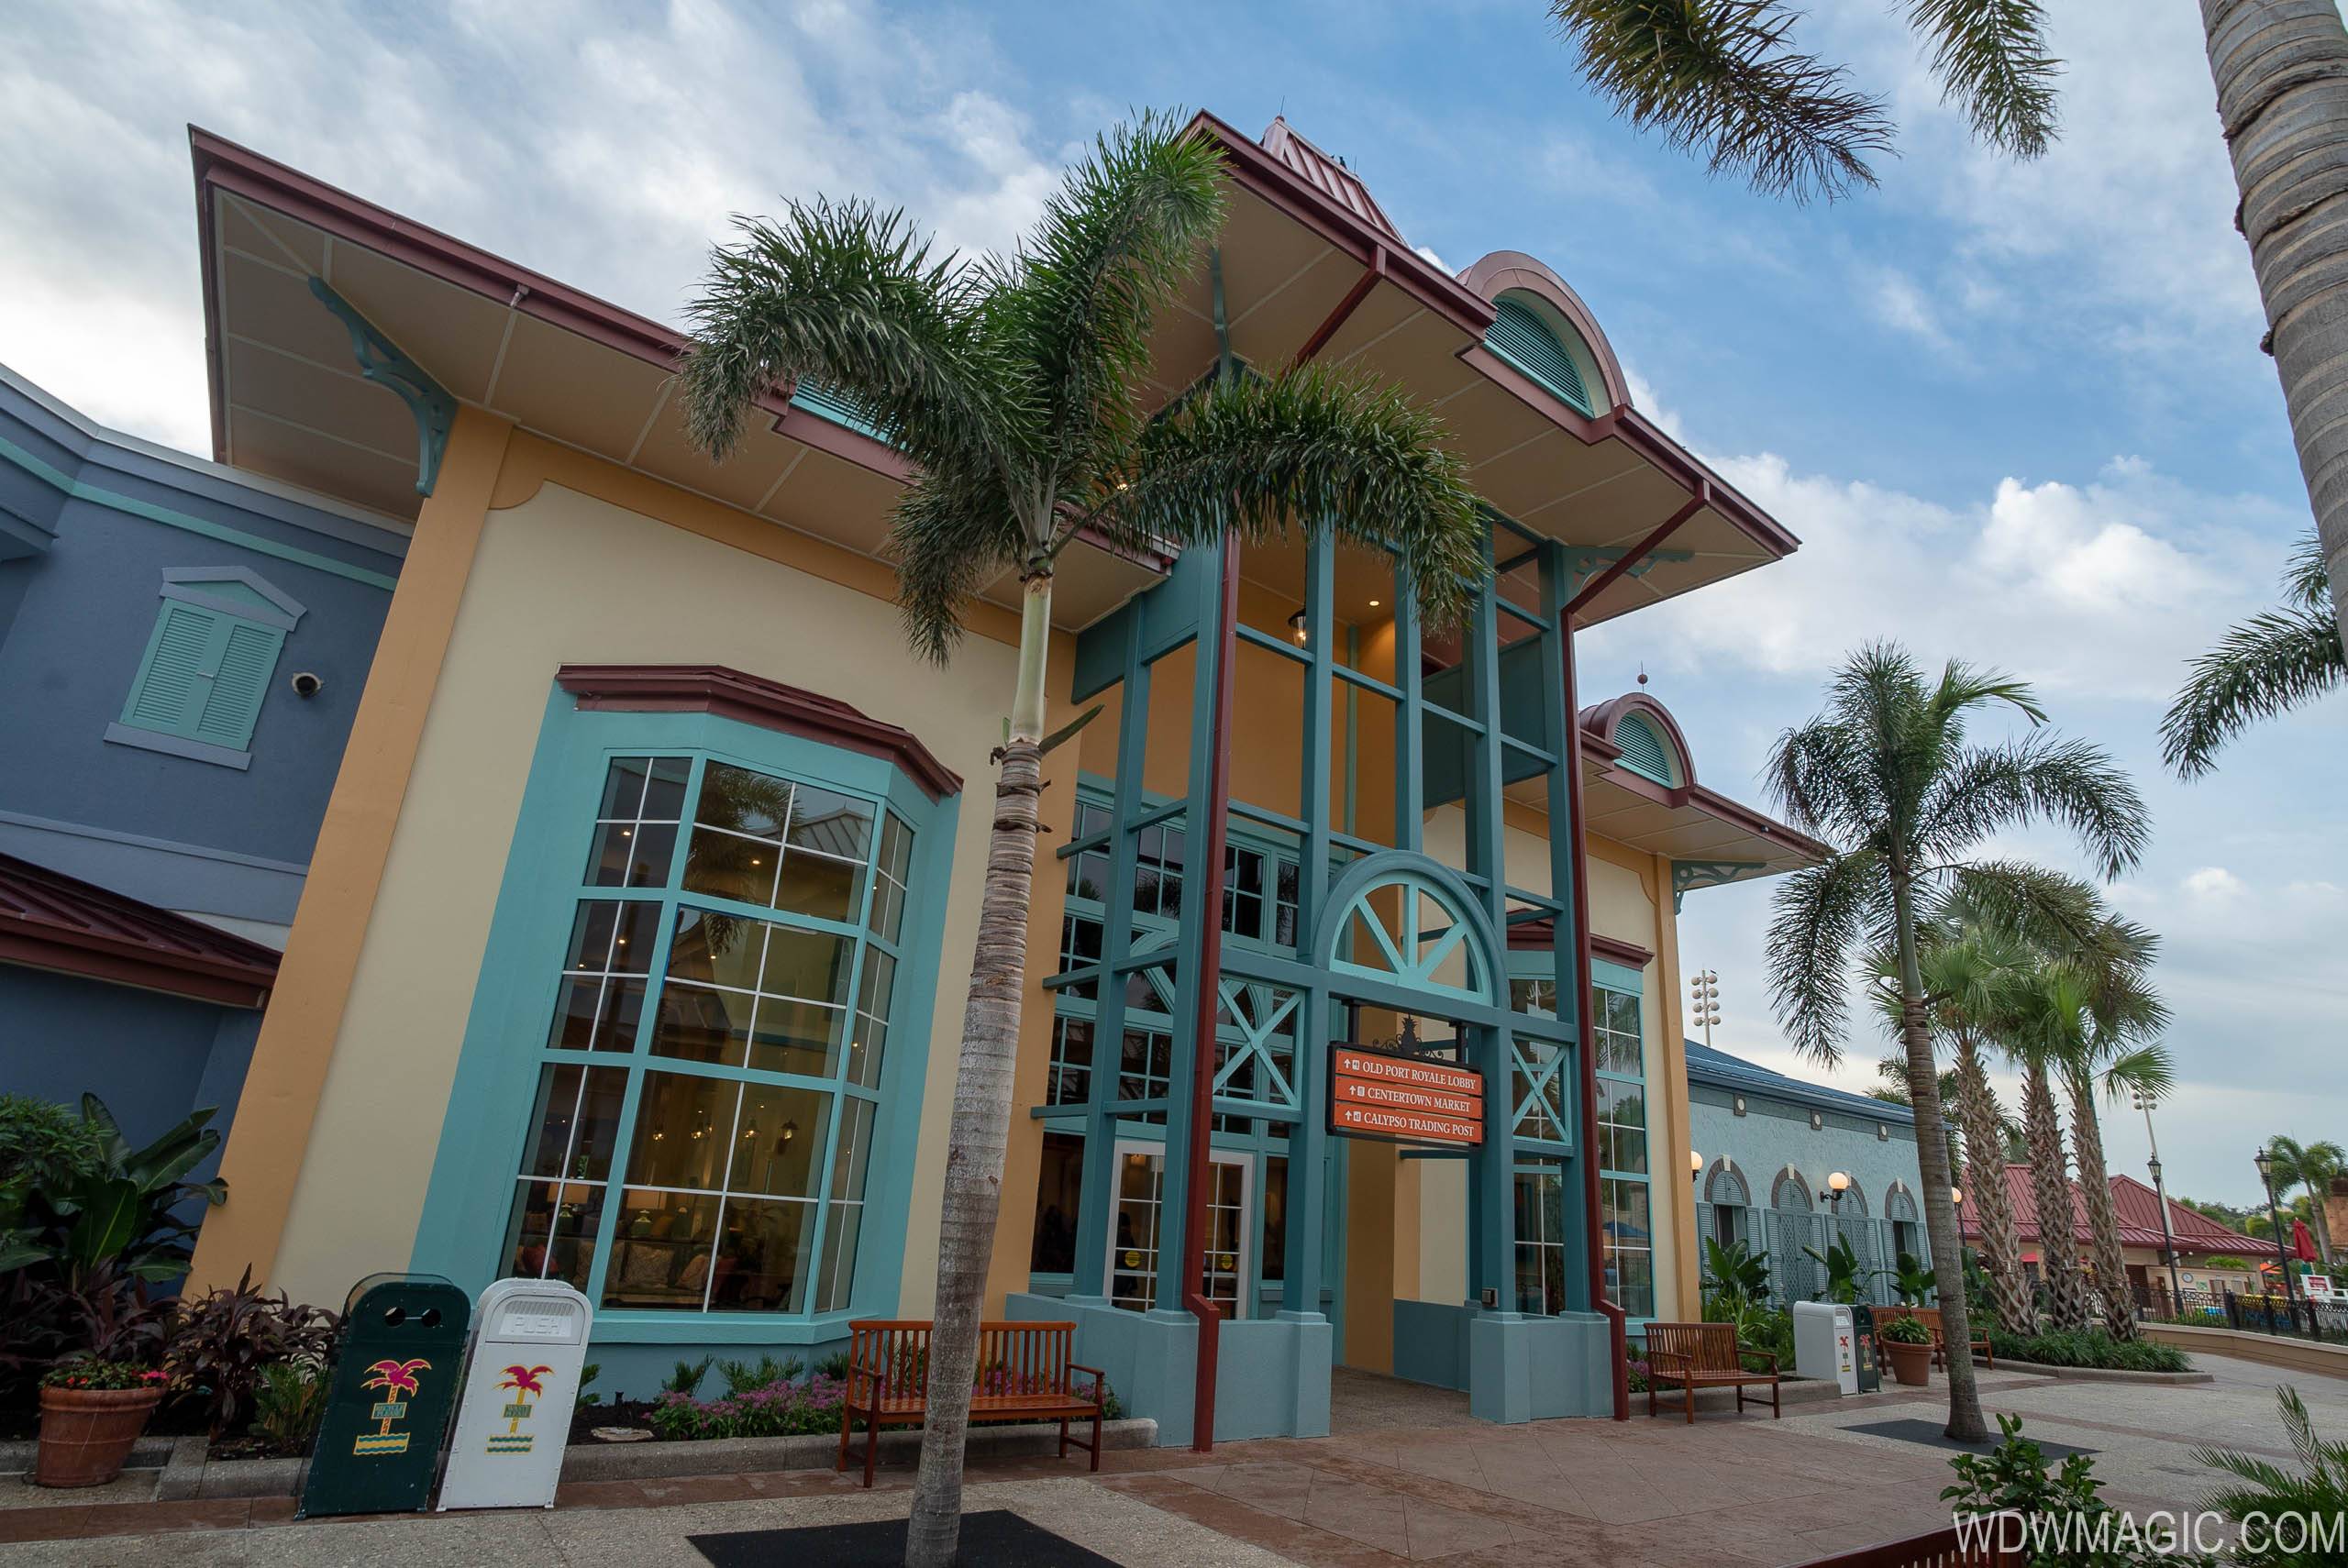 Details emerge on operational impacts during Caribbean Beach Resort renovations